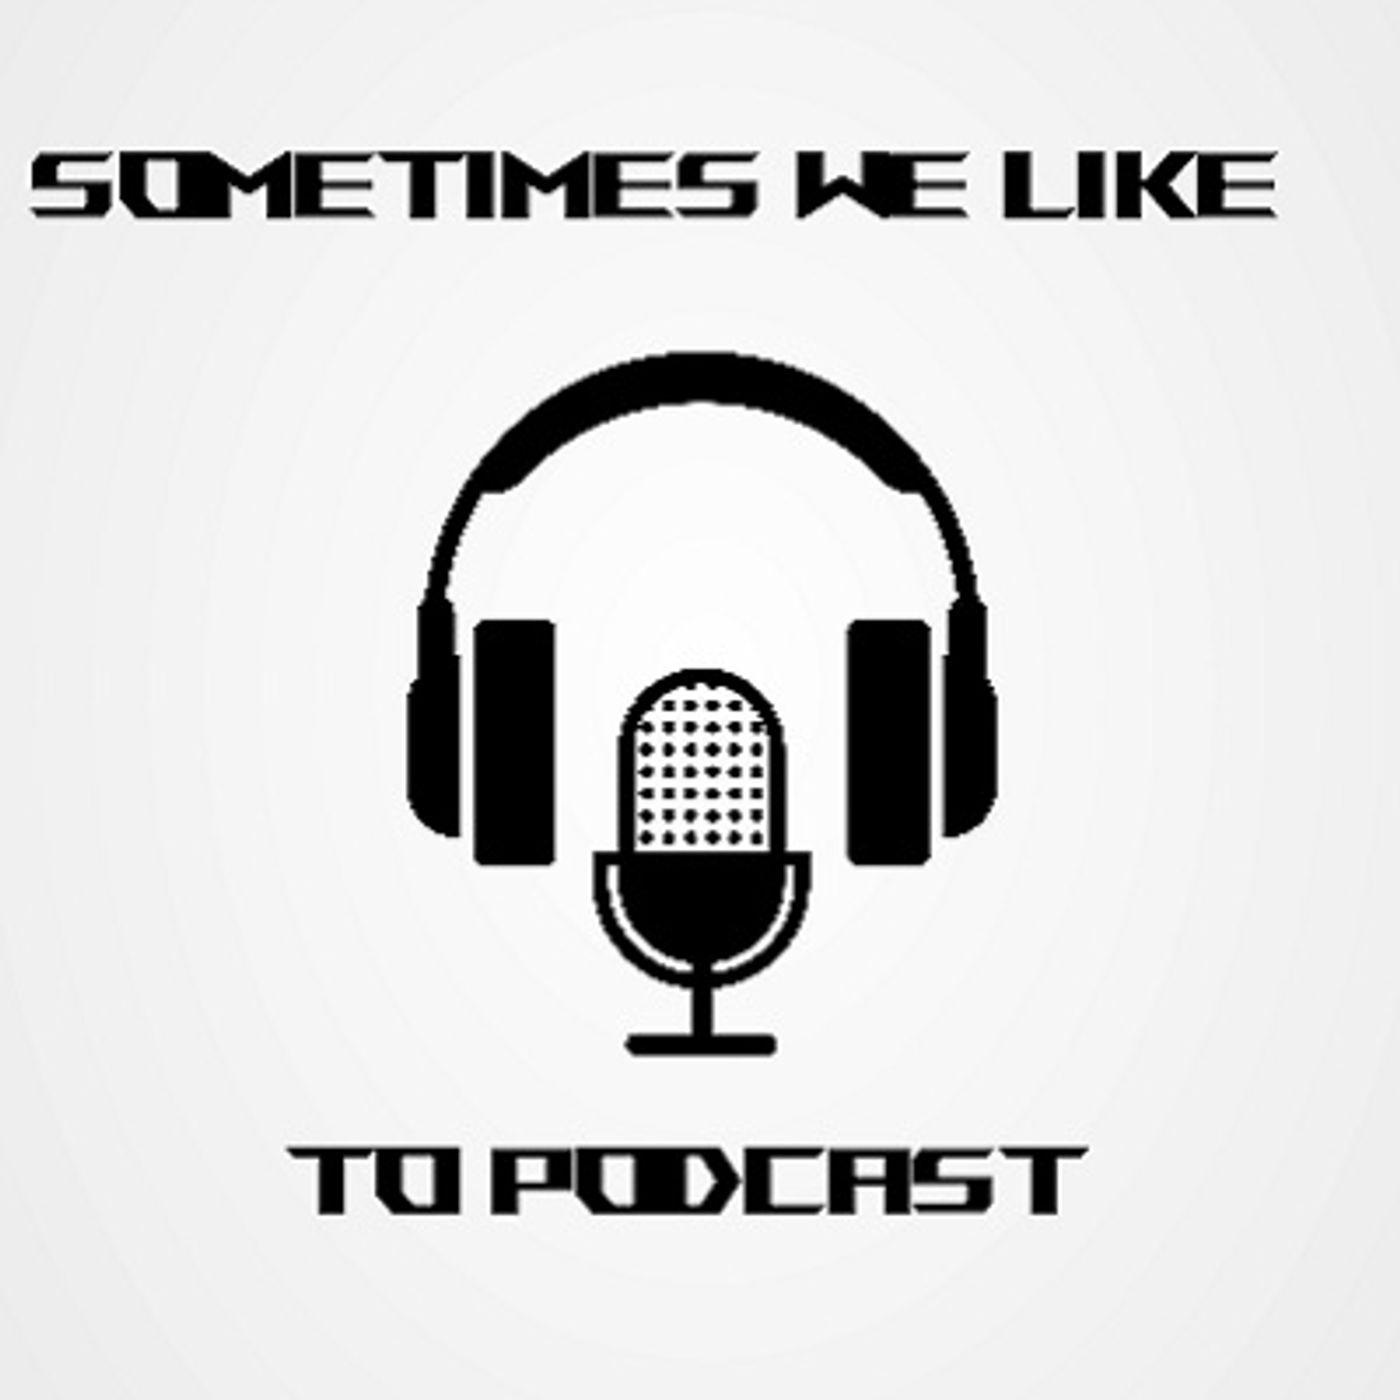 Sometimes We Like to Podcast